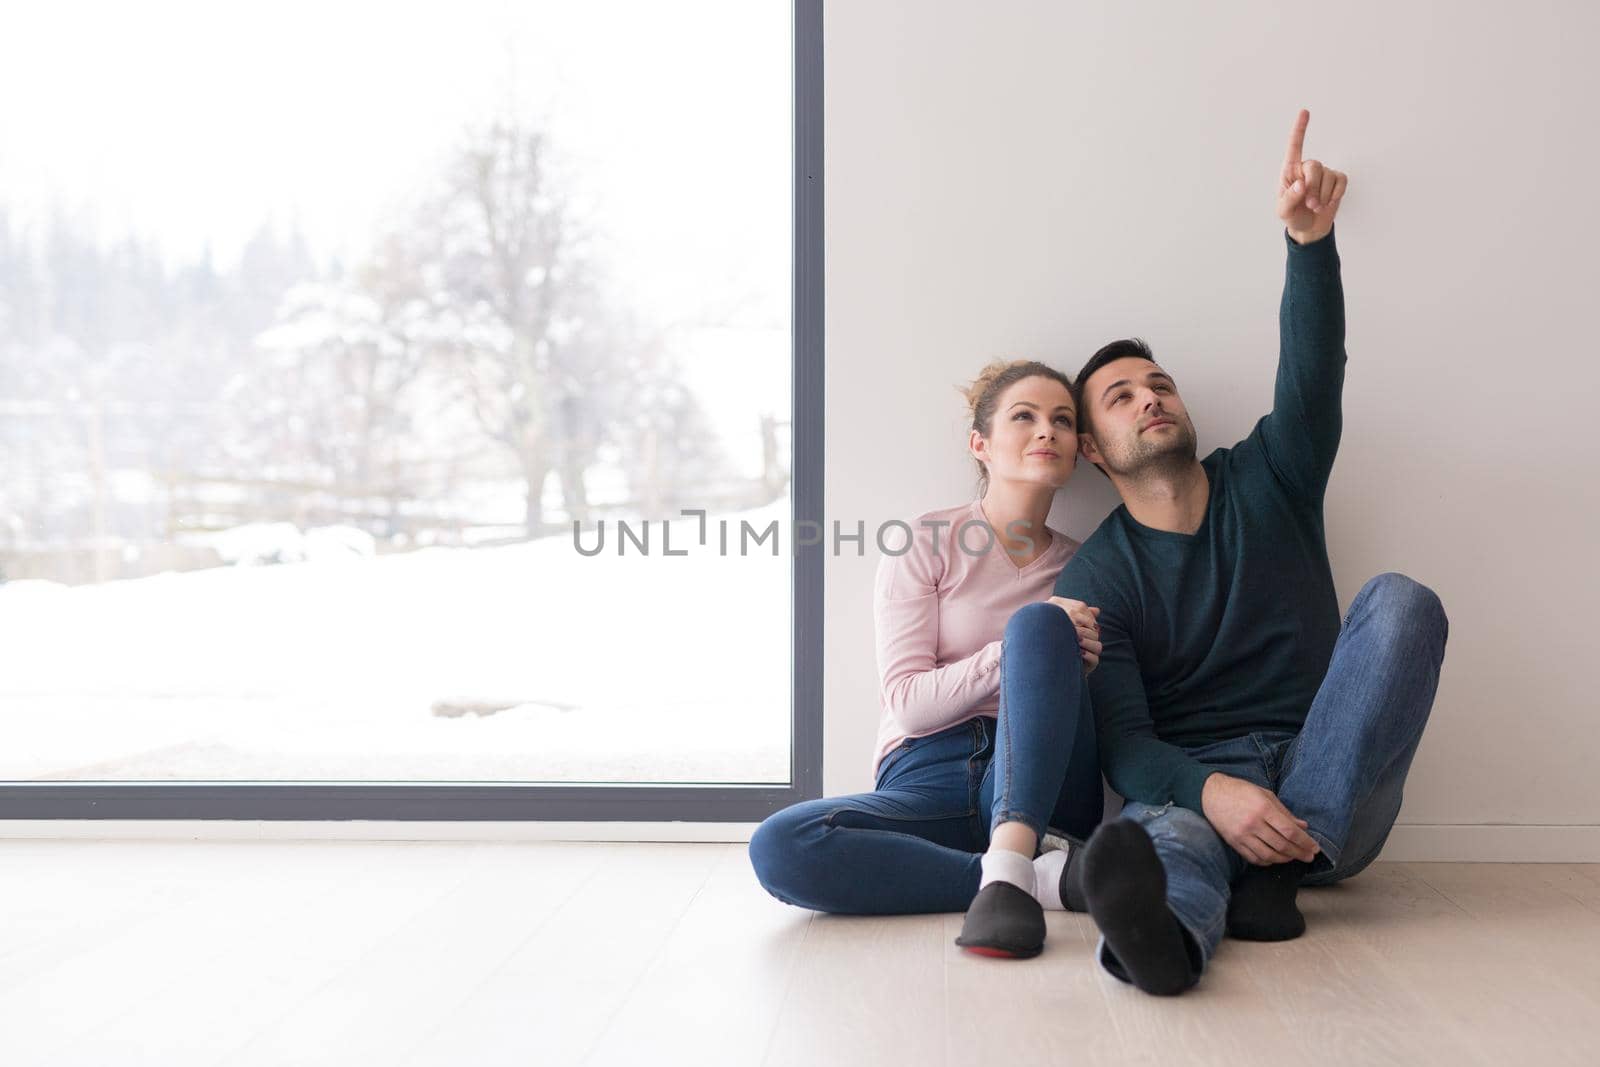 happy young couple sitting near window at home on cold winter day